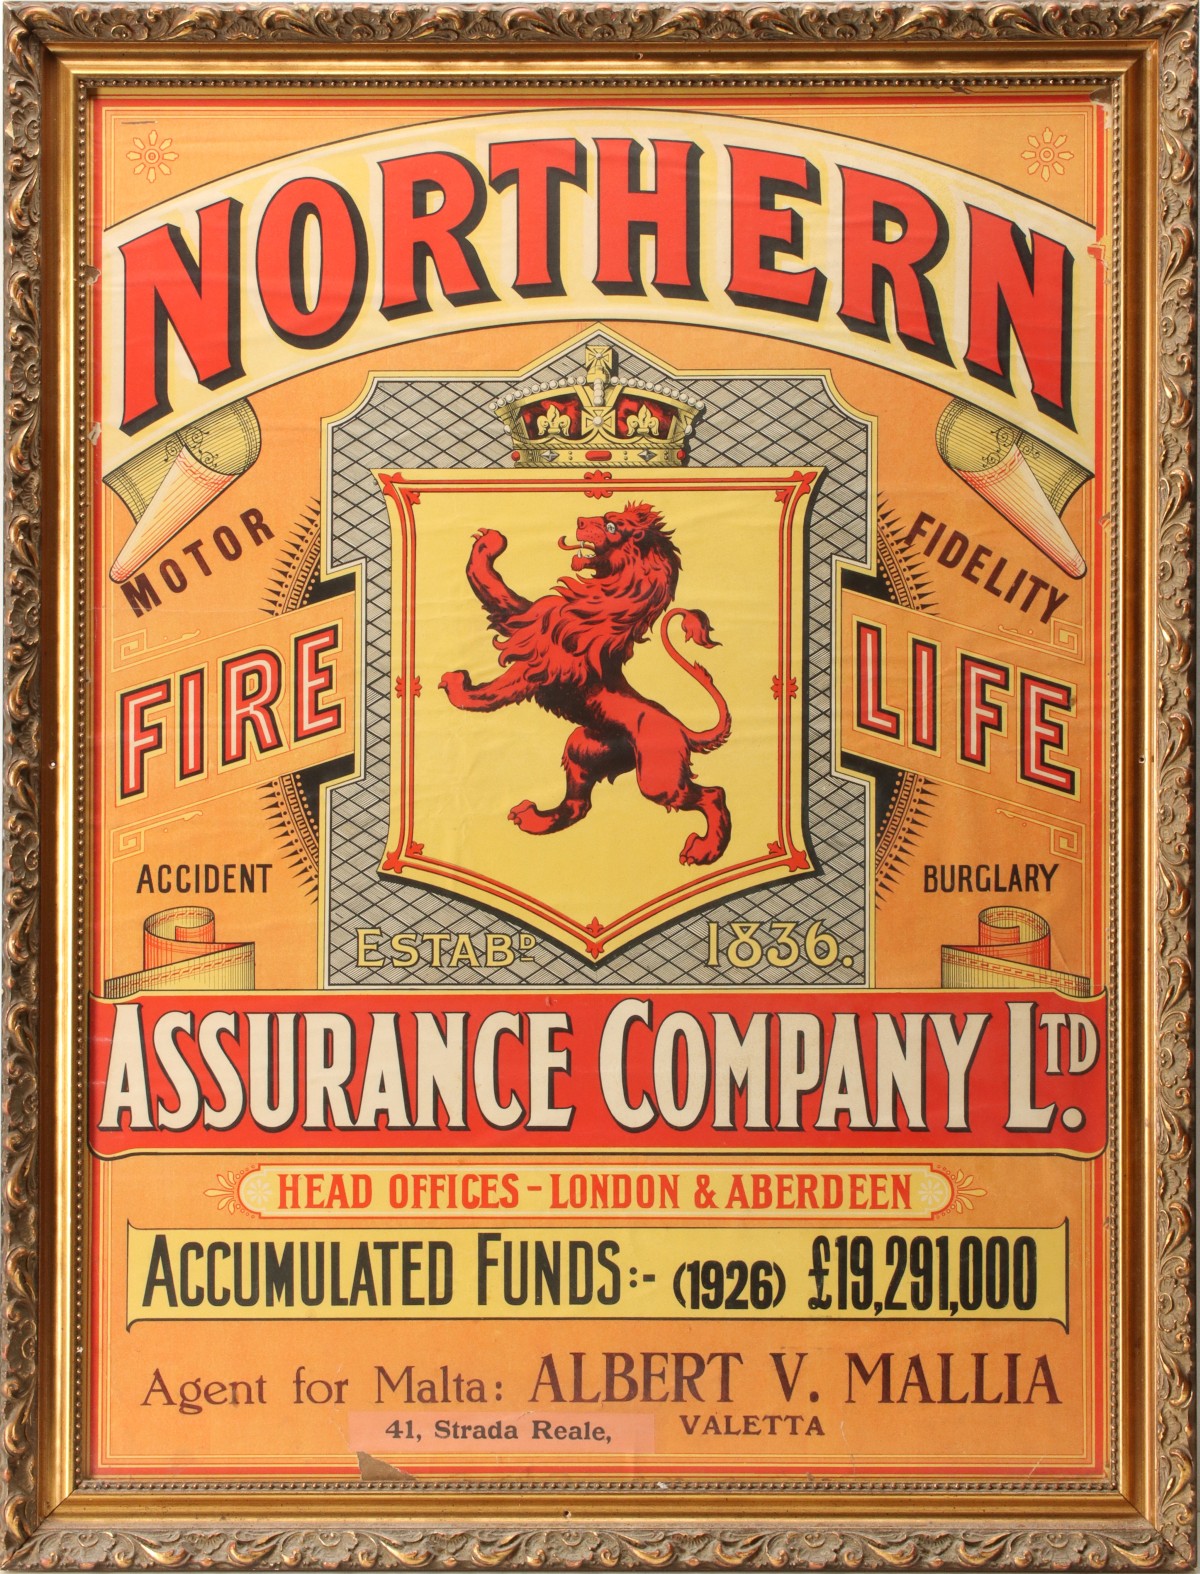 A NORTHERN ASSURANCE COMPANY ADVERTISING POSTER